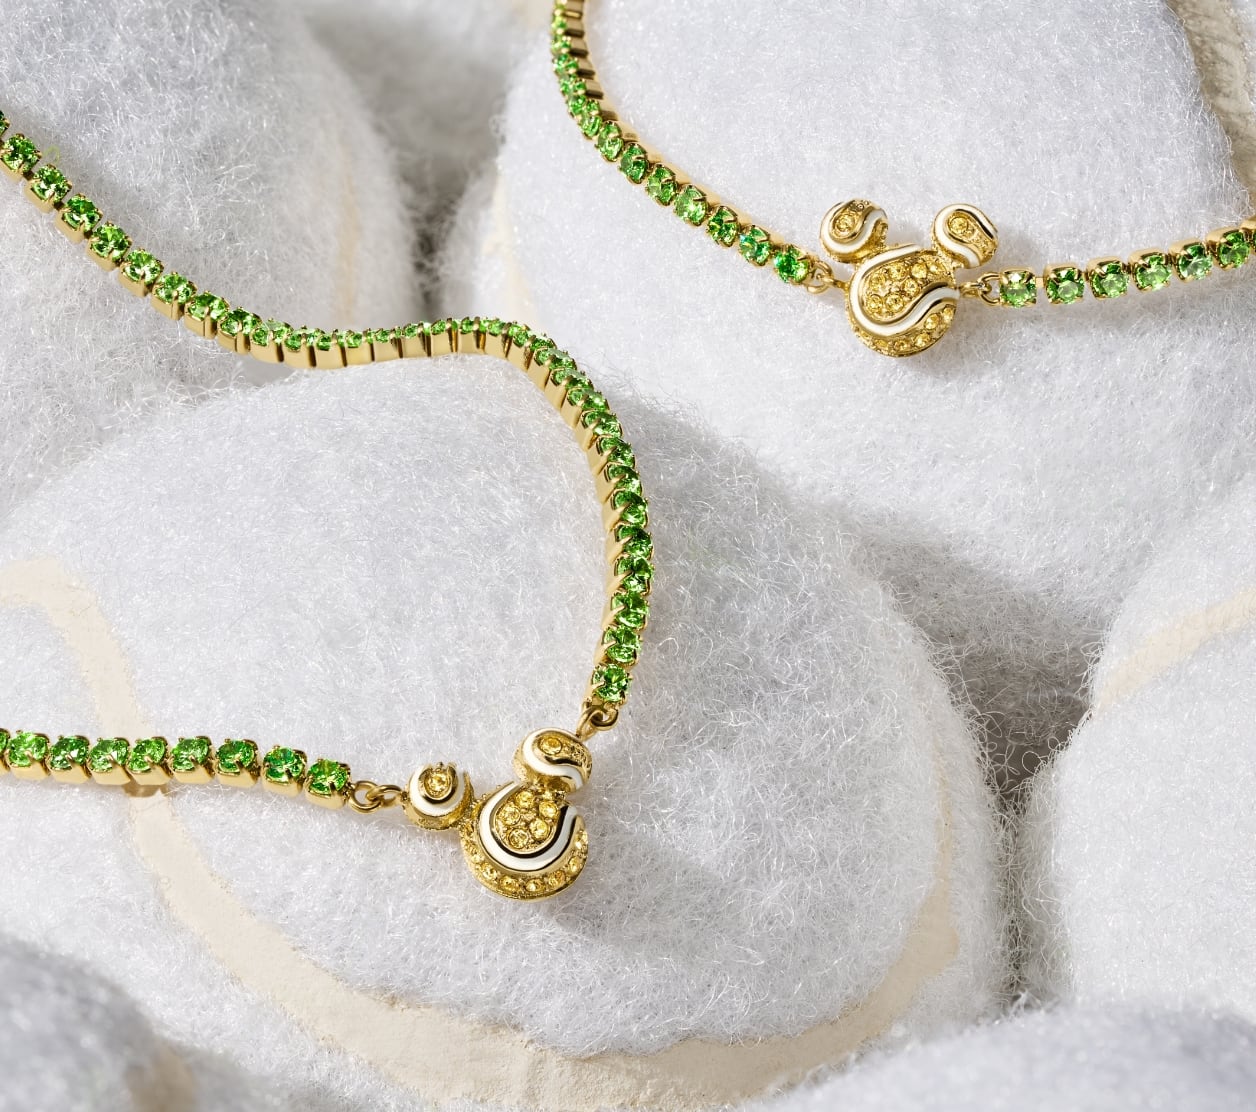 Our Disney Mickey Mouse tennis necklace and bracelet, displayed on white tennis balls. Each piece is embellished with green and yellow pavé crystals. Mickey's silhouette adds a playful accent, reimagined as a trio of sparkling tennis balls.